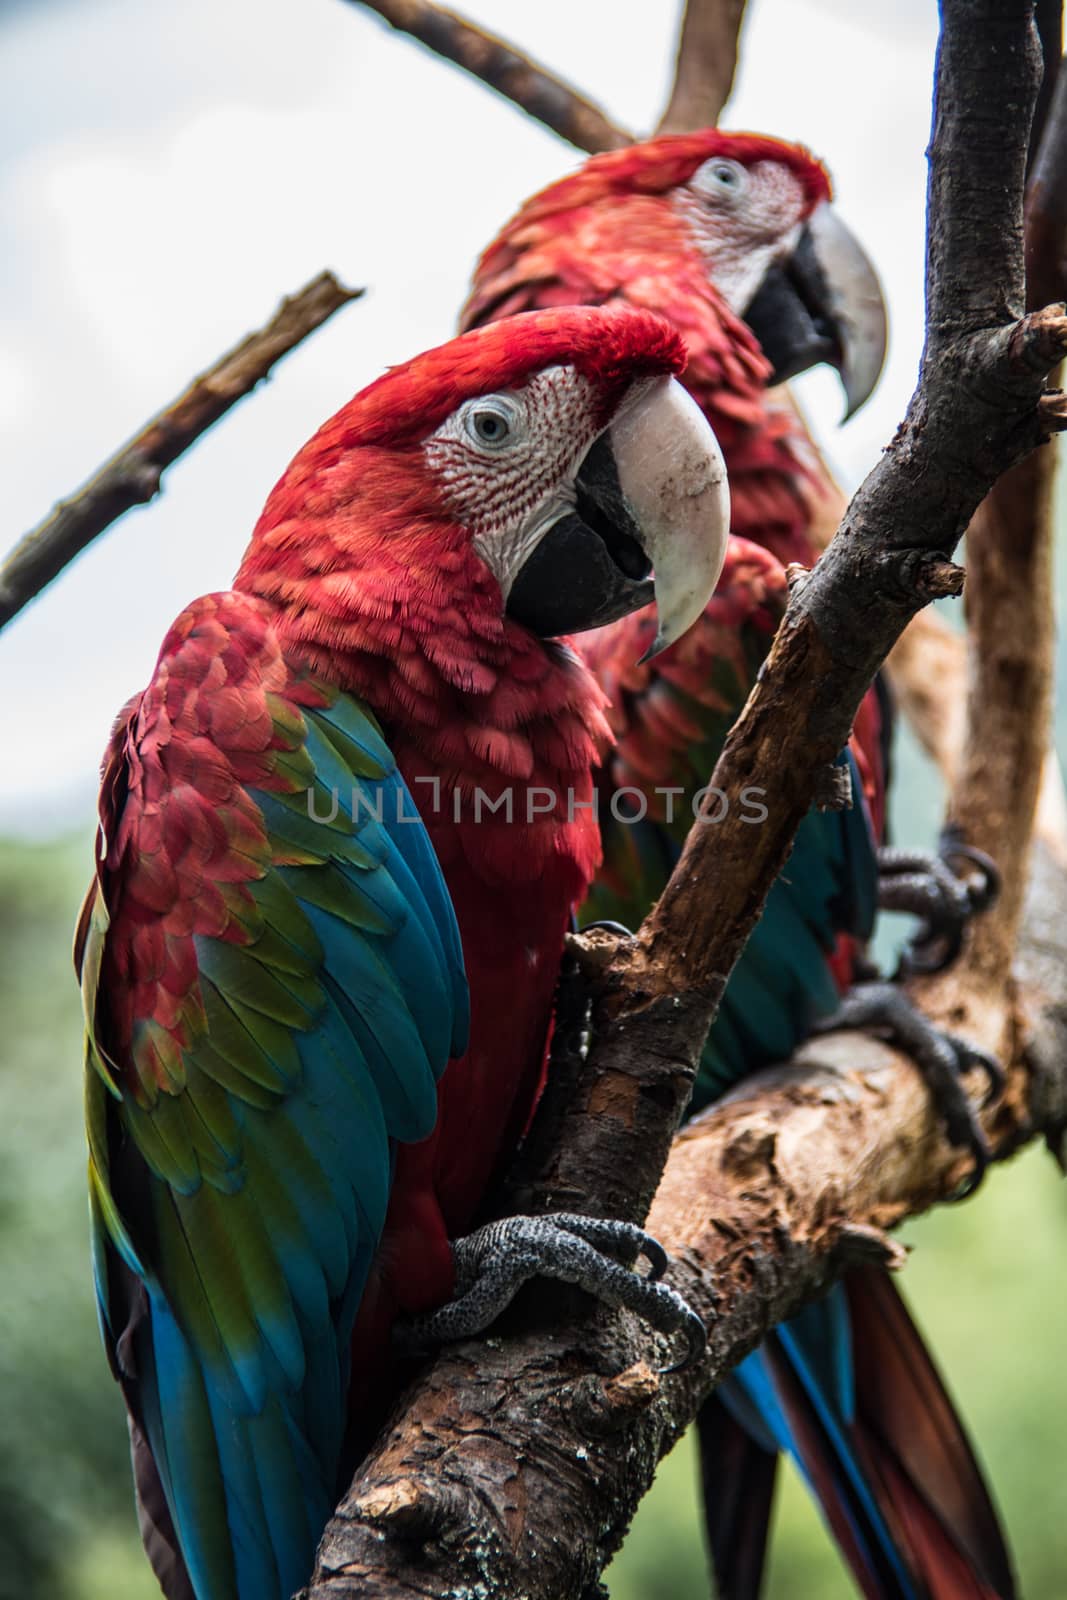 red blue green big parrots from south america